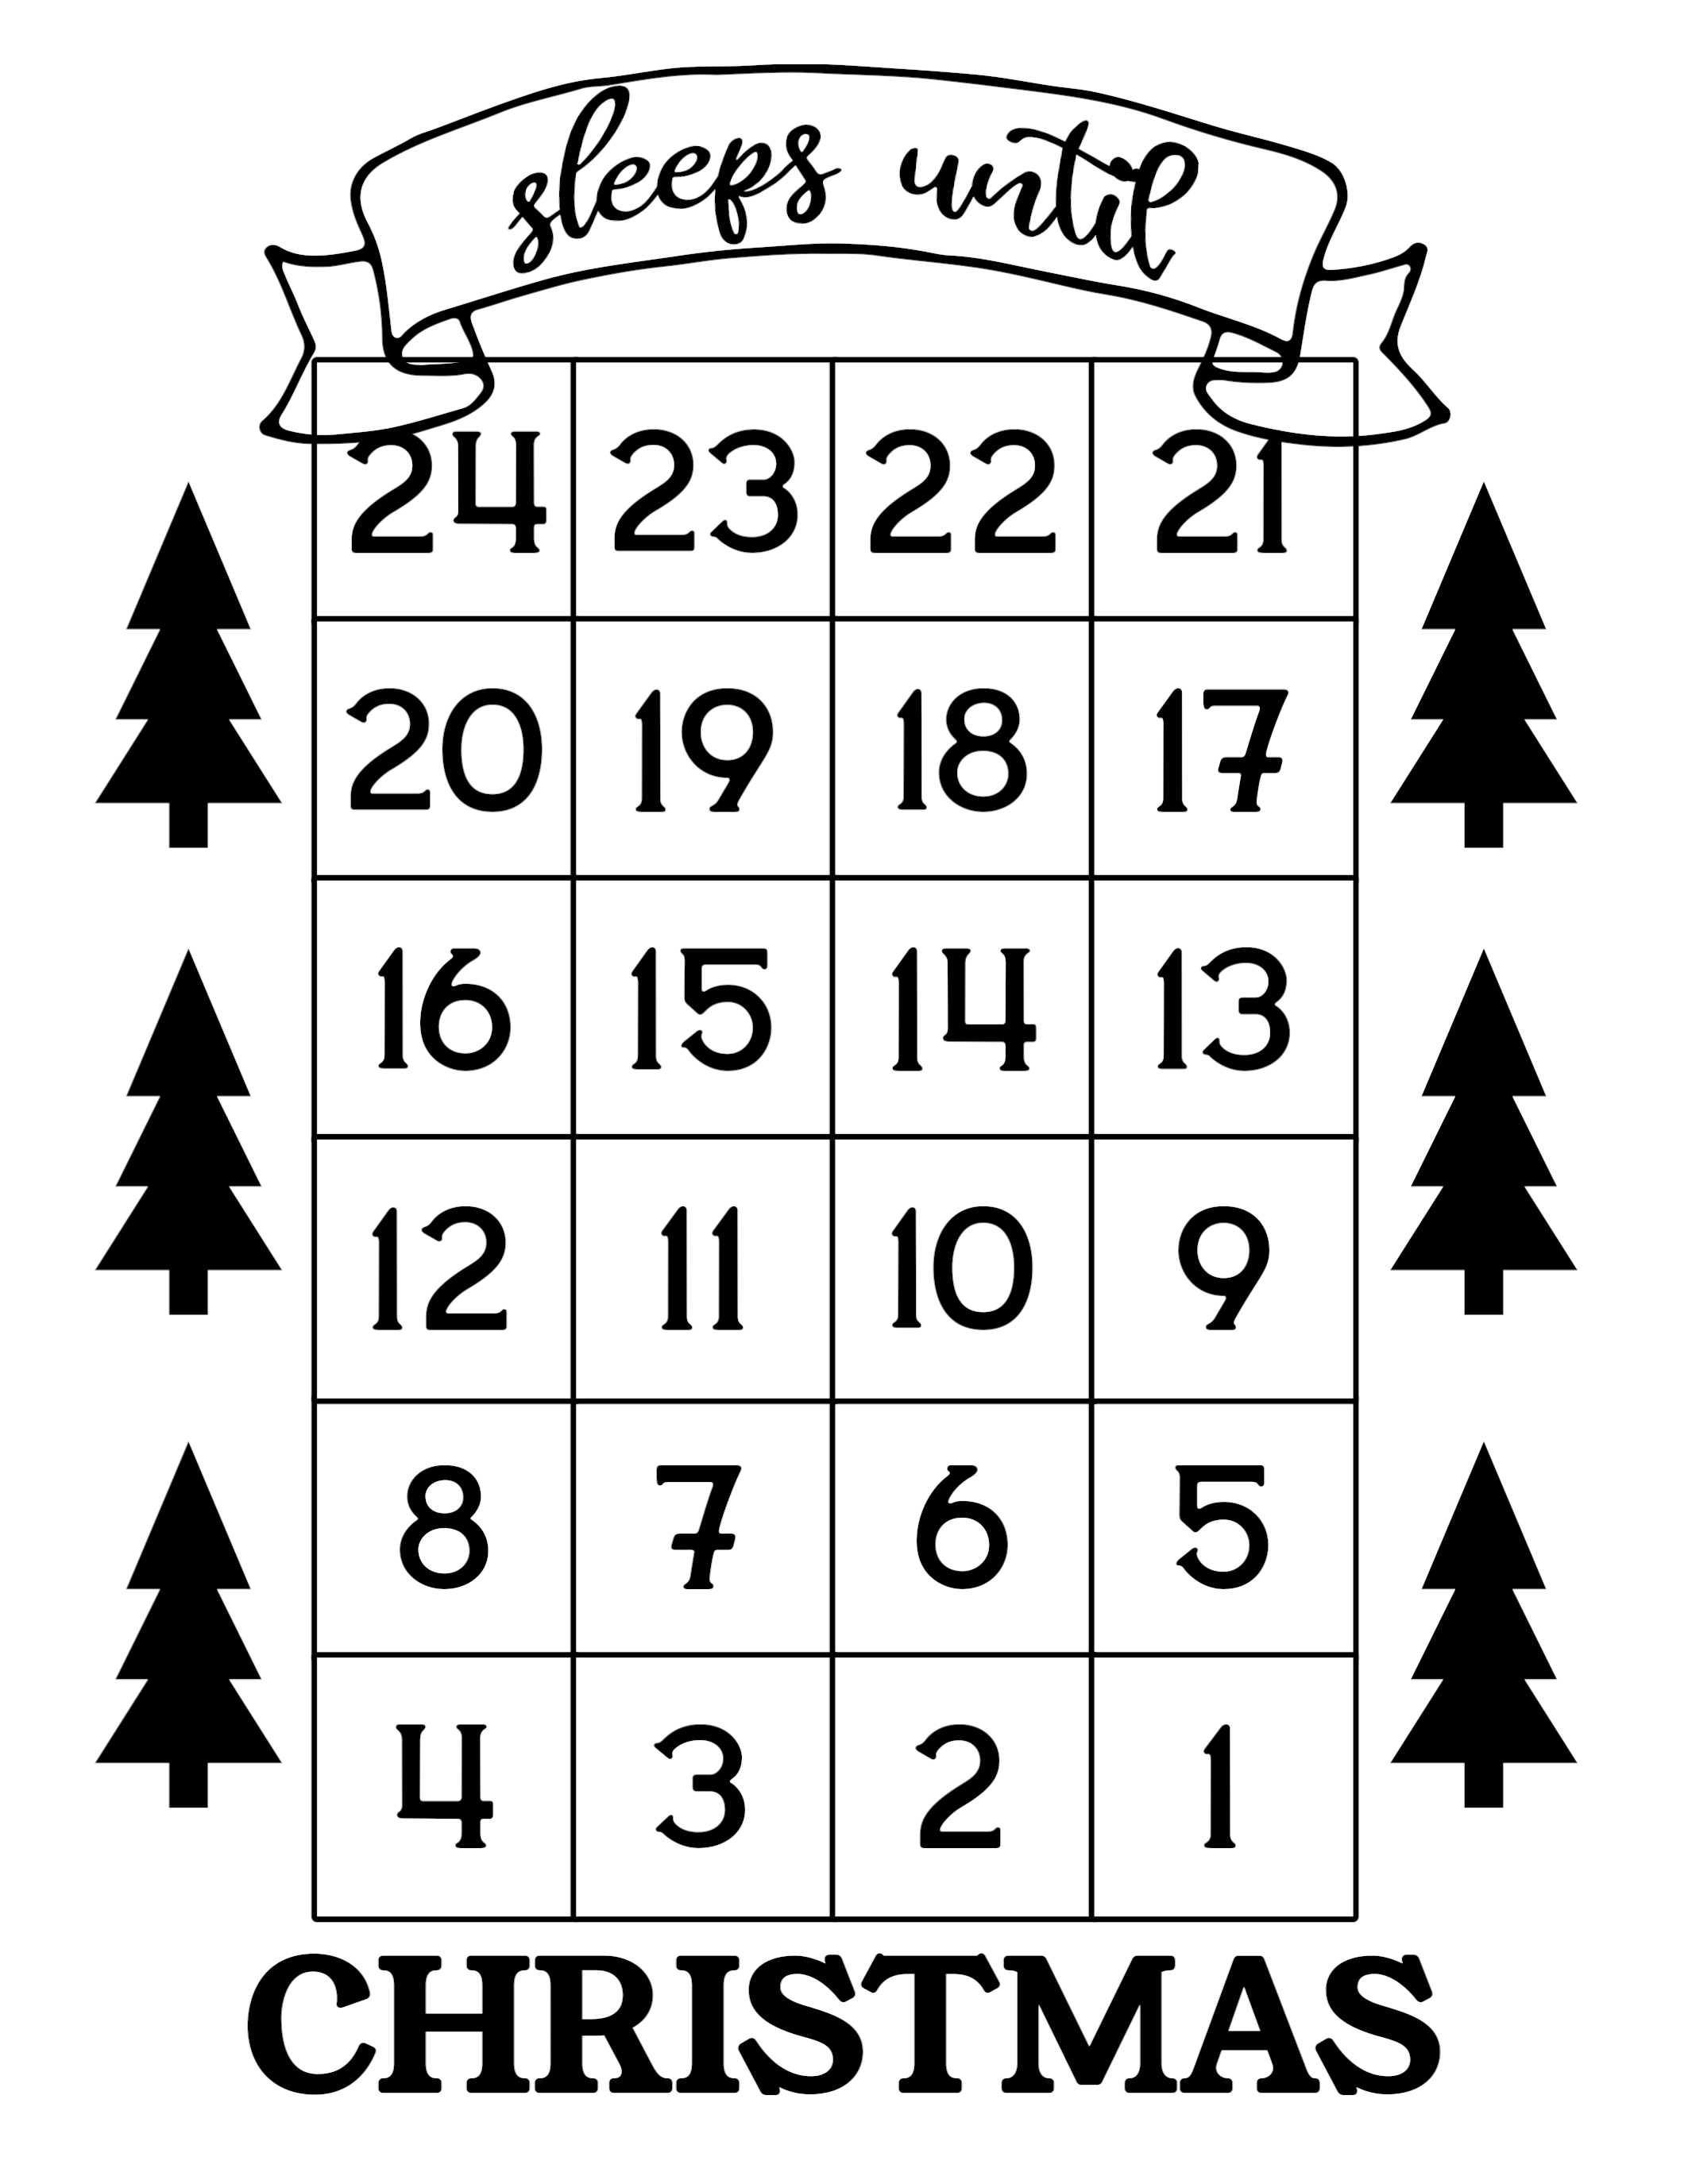 How Many Days Until Christmas Free Printable - Paper Trail